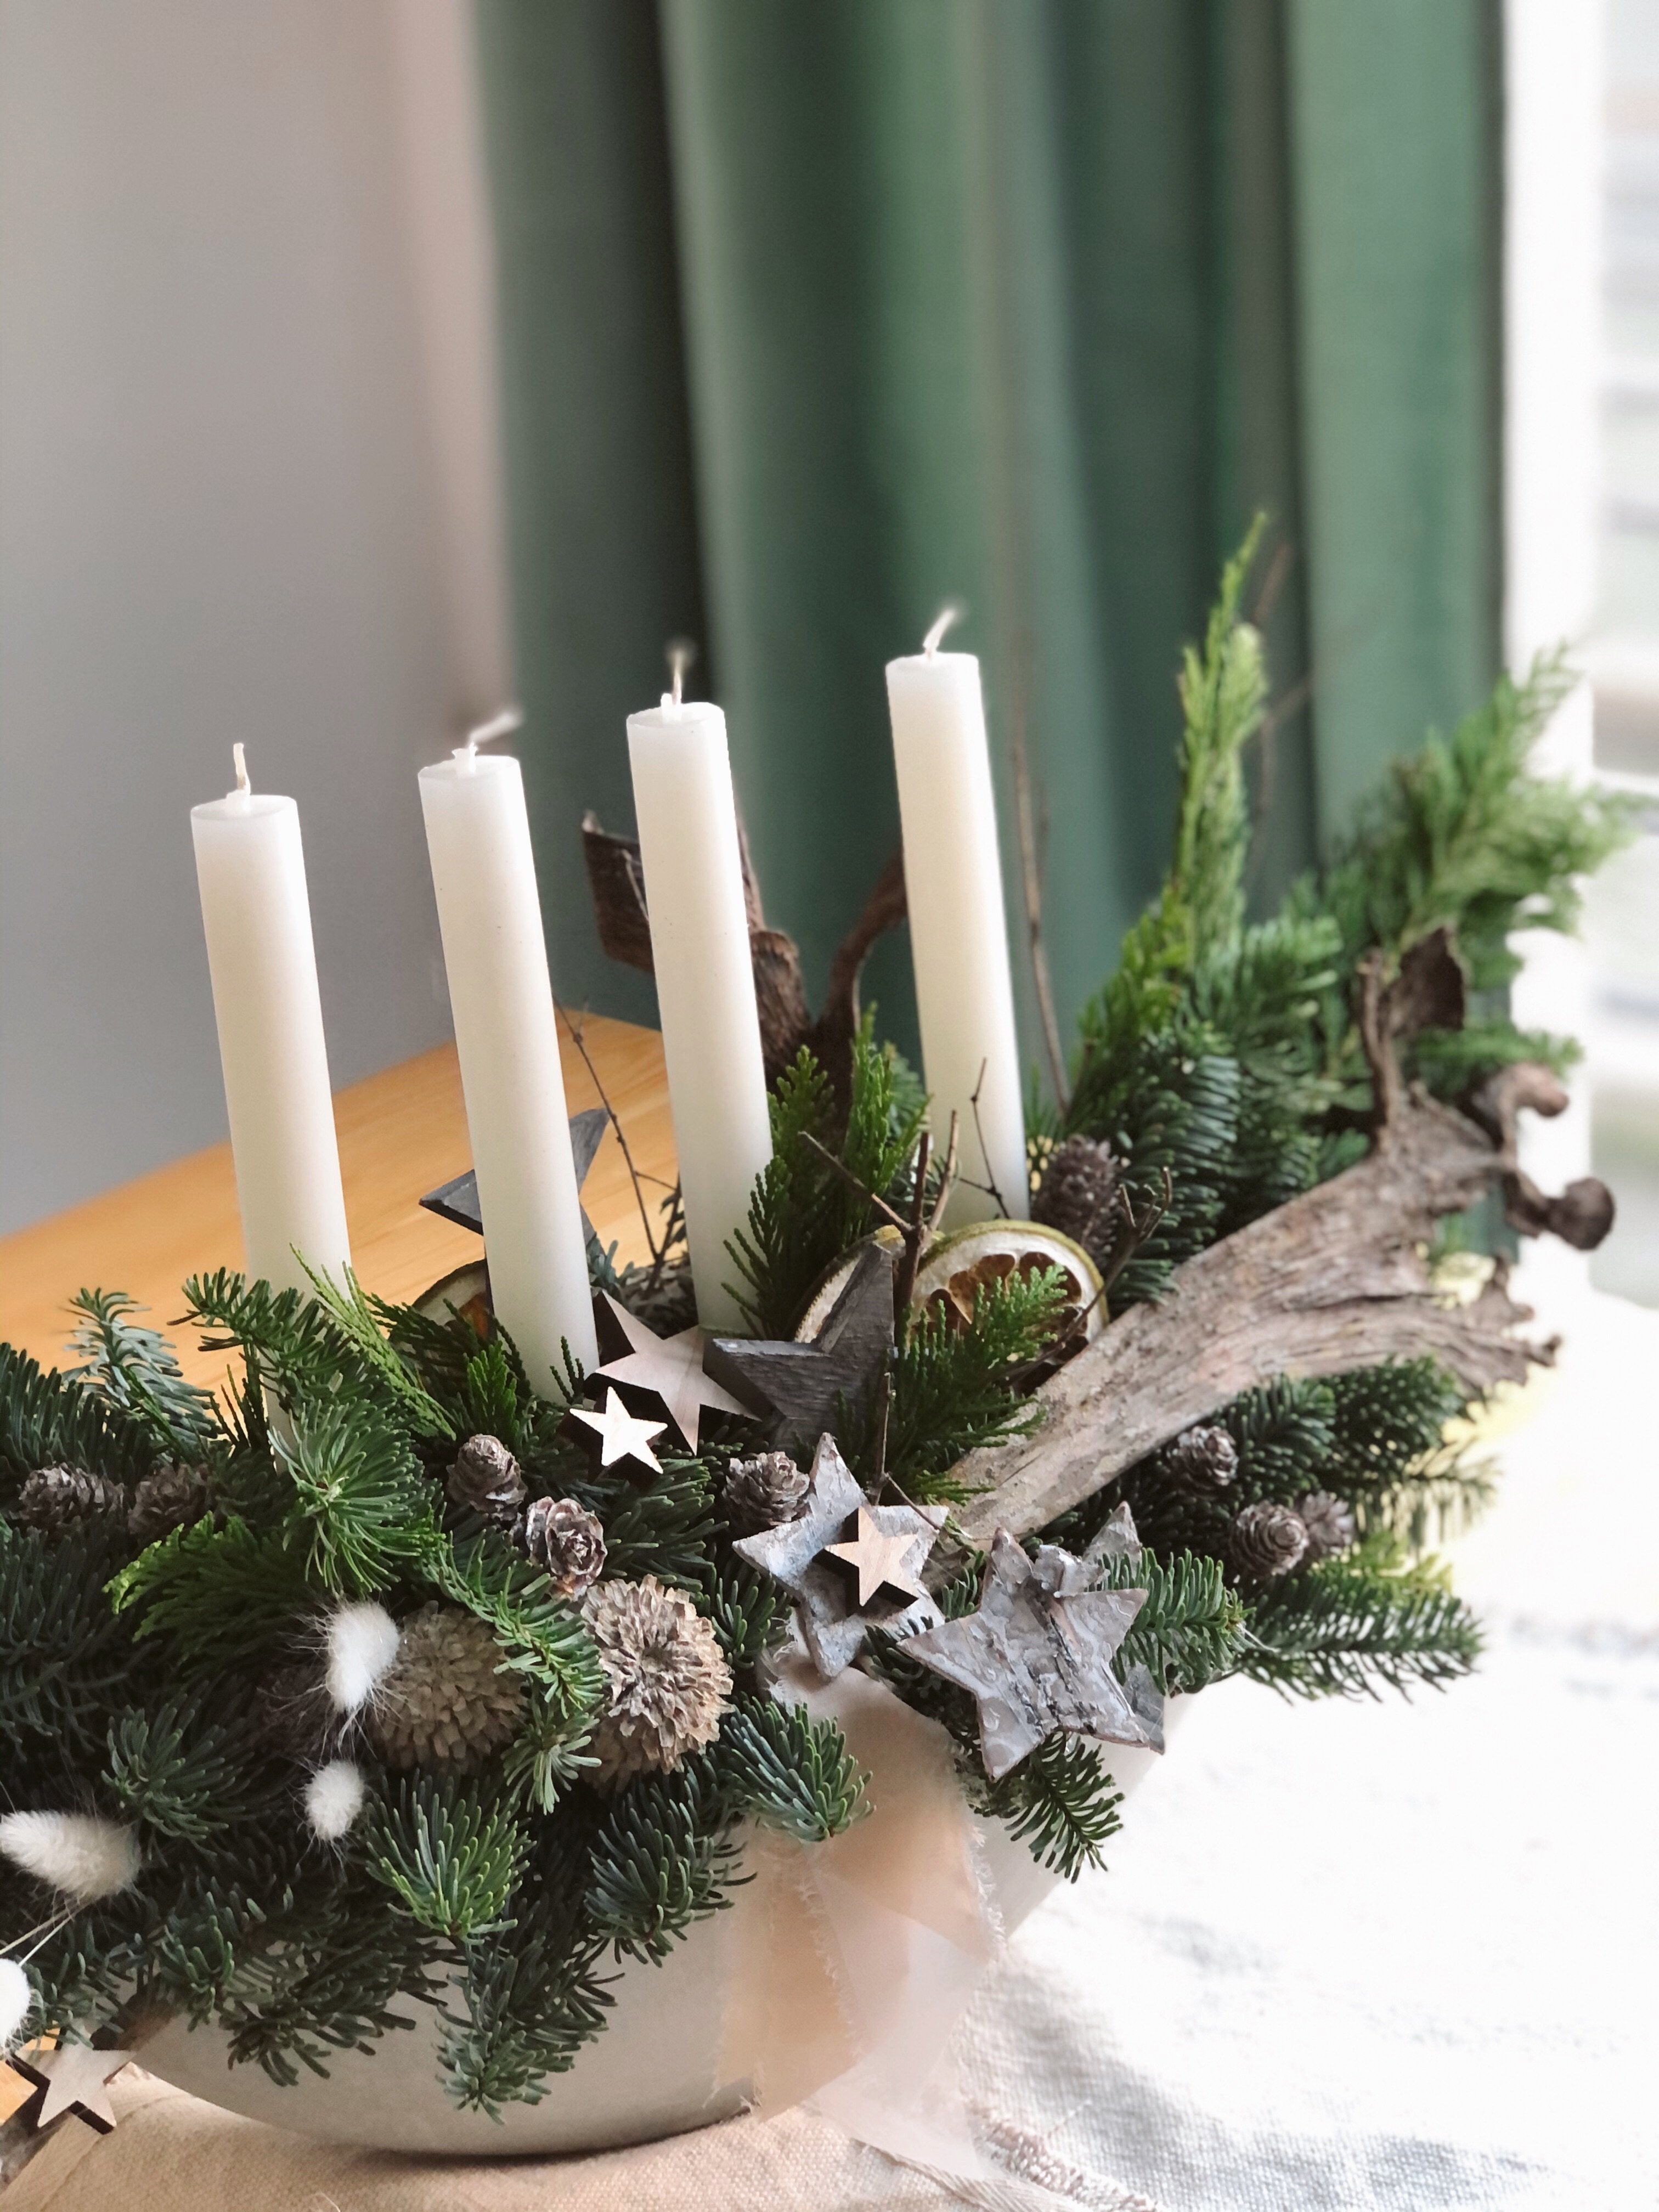 Rustic Christmas composition